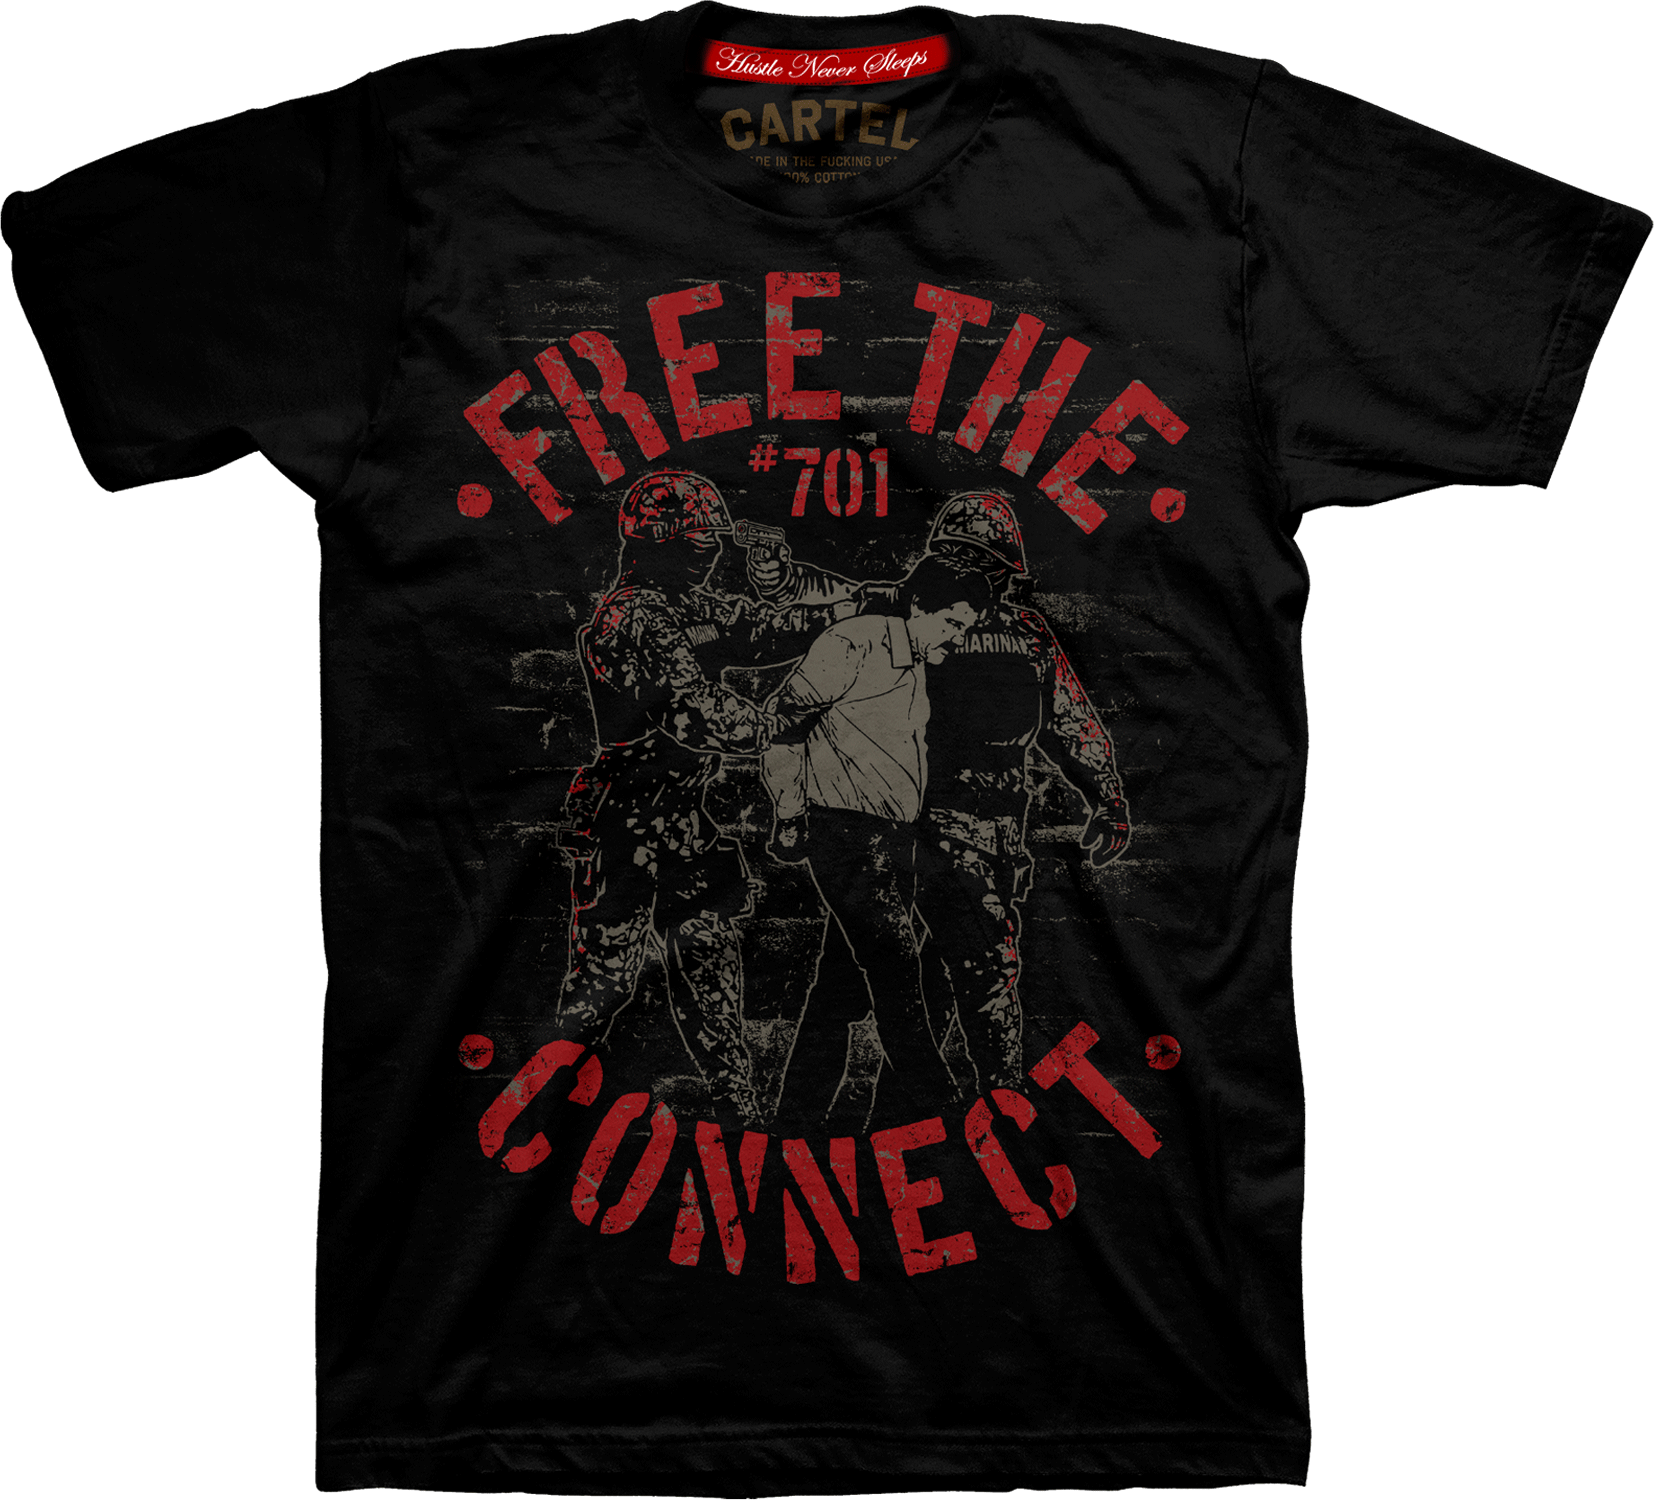 Free The Connect